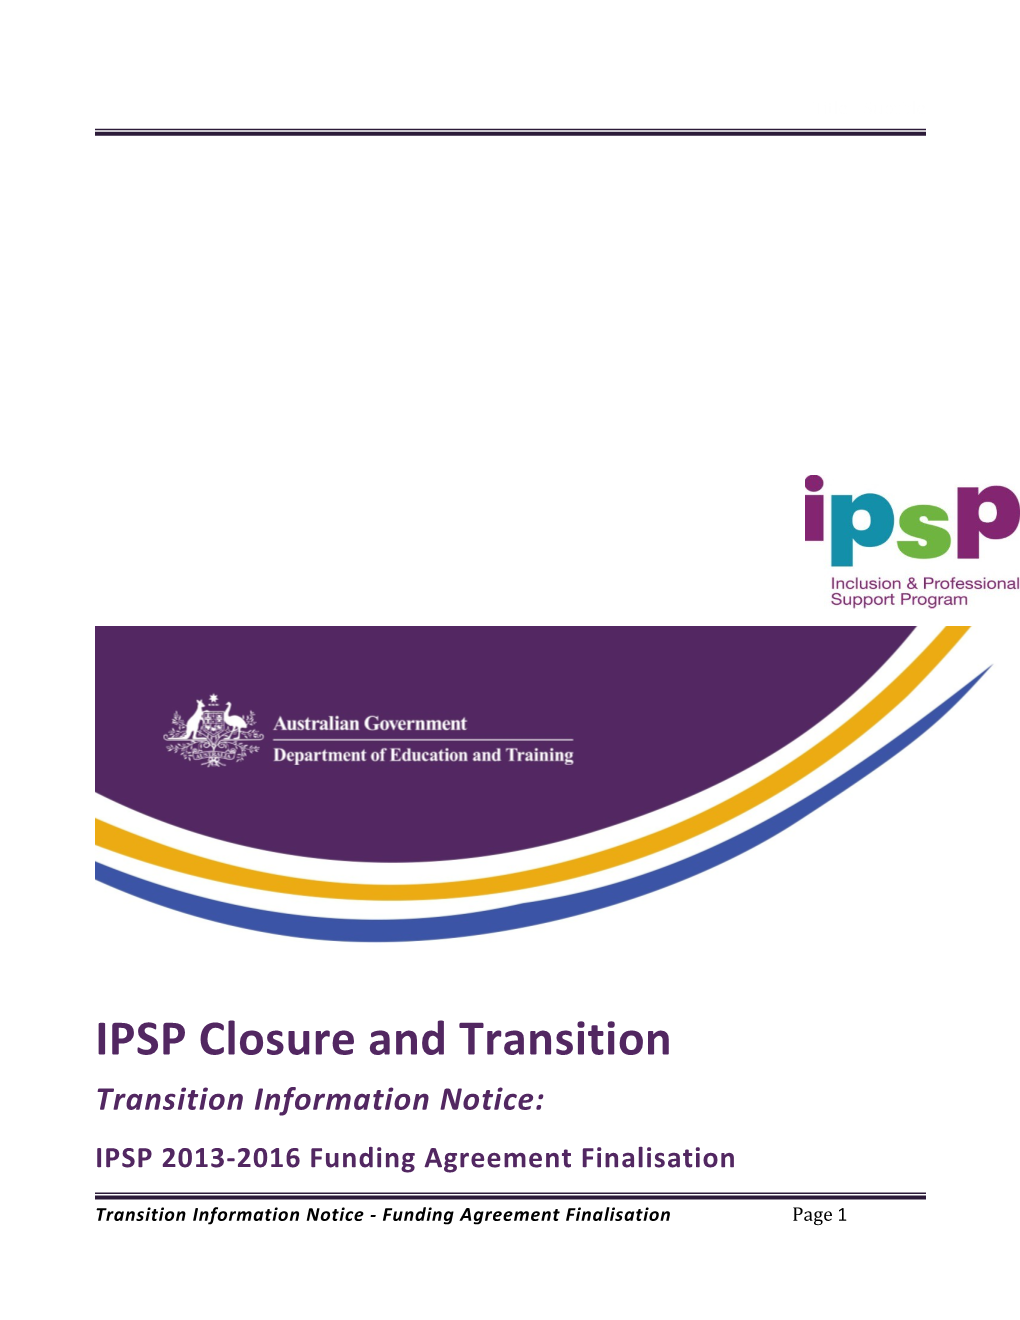 IPSP Closure and Transition